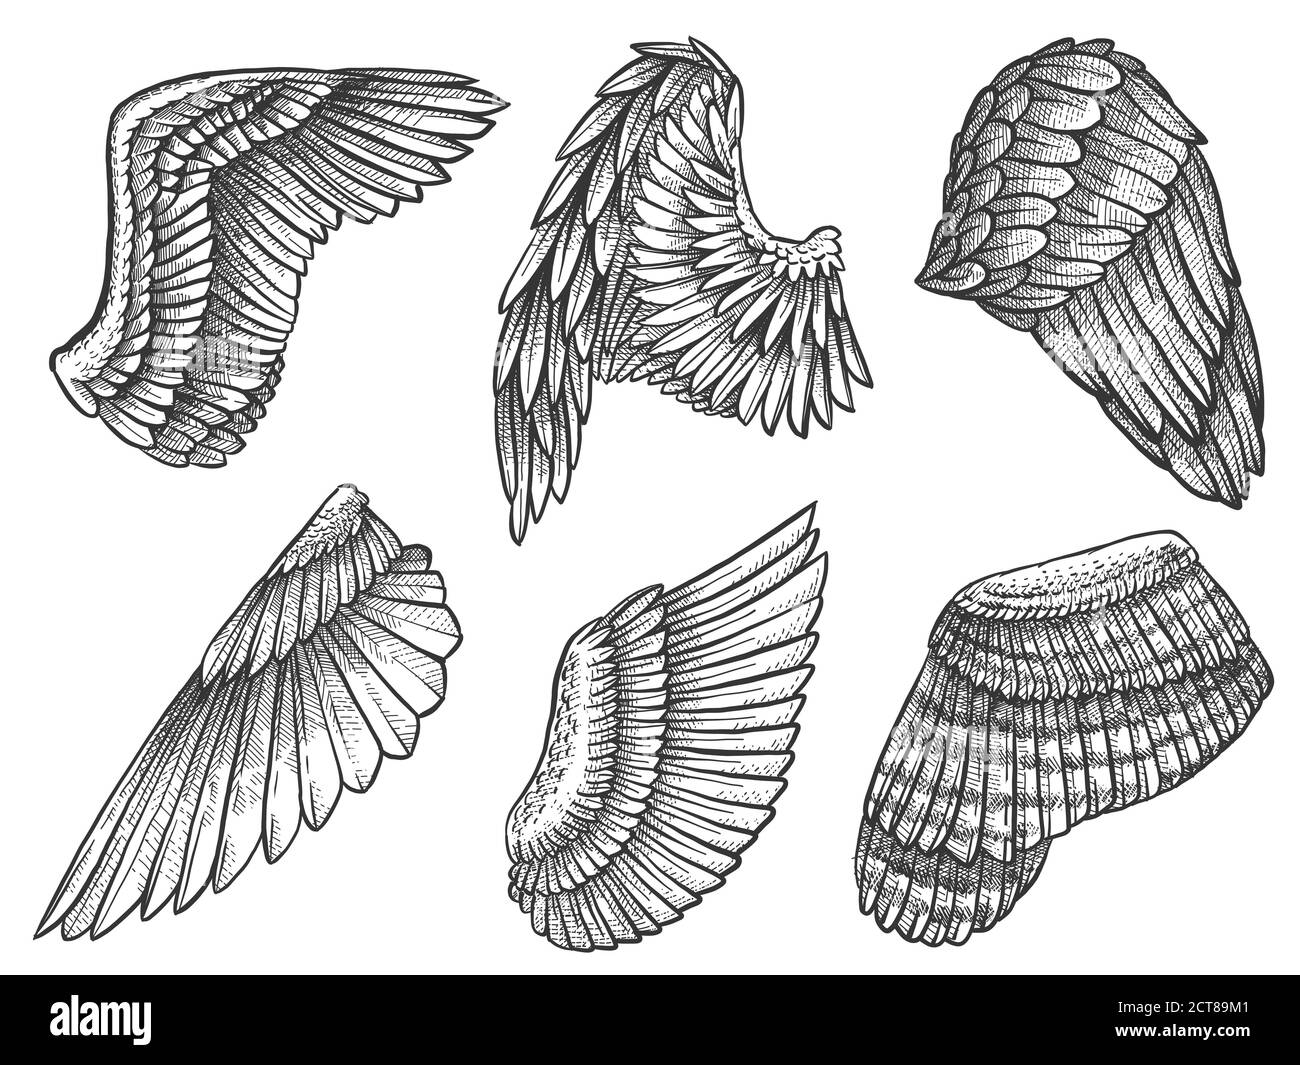 eagle wings picture, by Momof4boyoboys for: wings drawing contest -  Pxleyes.com